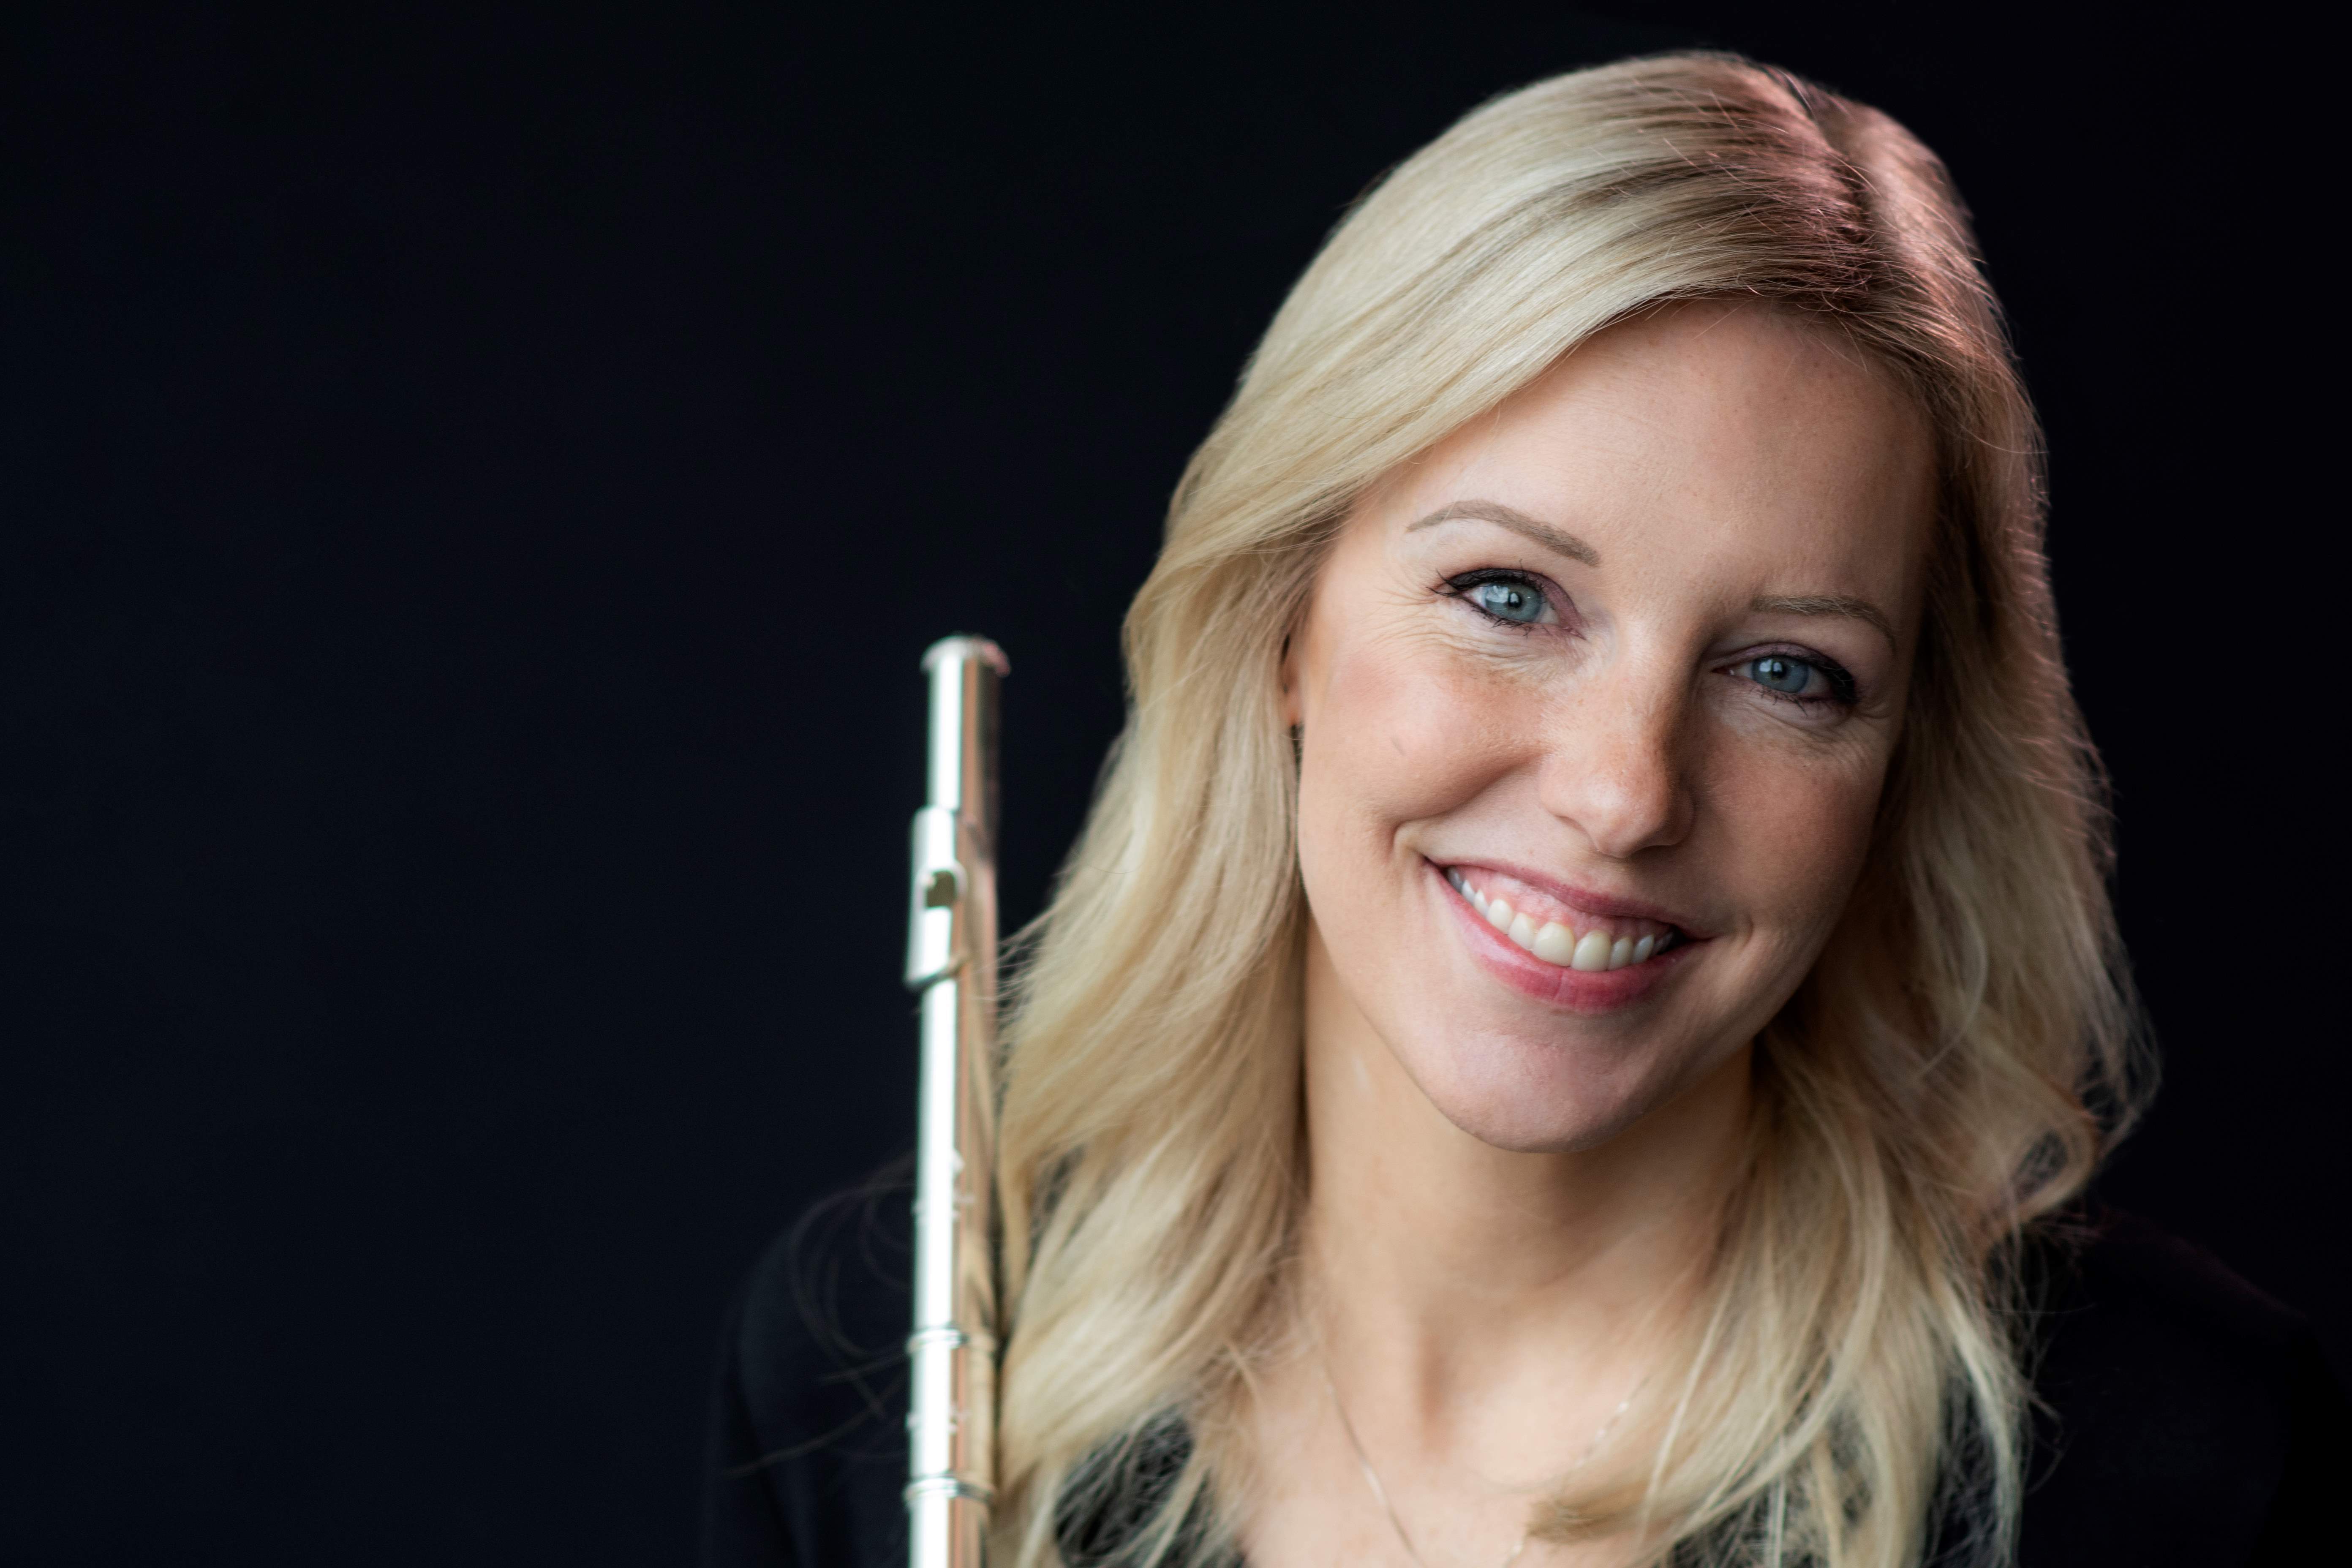 Blonde haired woman wearing a black dress, holding a flute and smiling. 